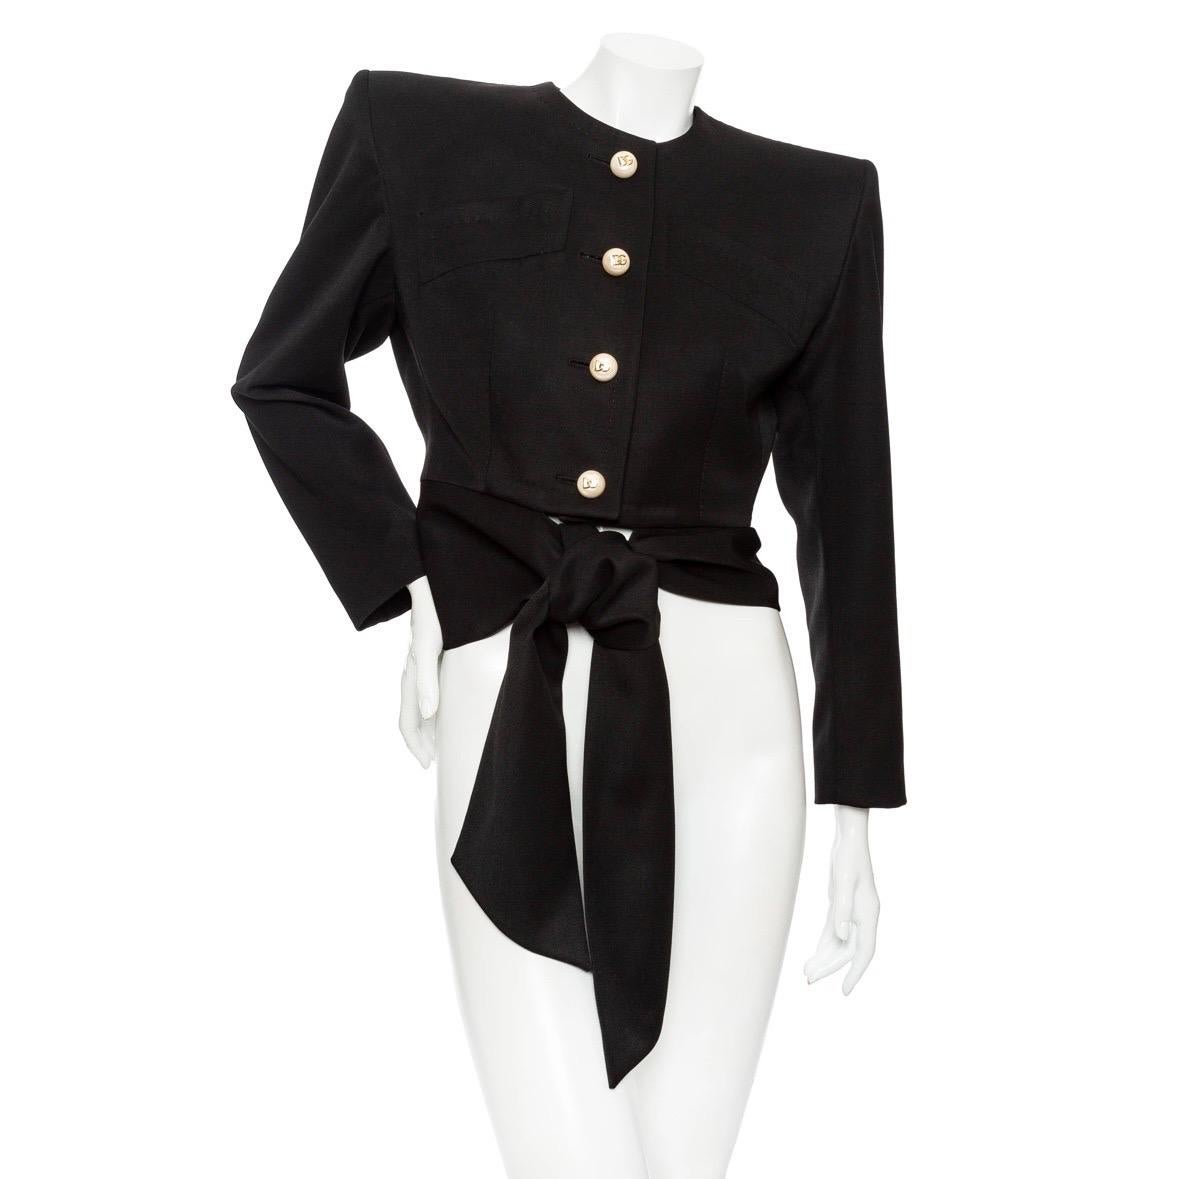 Dolce & Gabbana Black Wool Structured Tie-Waist Blazer

Black
Structured shoulders
Front welt pockets
Fitted waist with attached self-tie
Pearly gold-tone DG buttons
Crop fit above tie
Made in Italy
100% virgin wool; 92% silk, 8% elastane (lining);